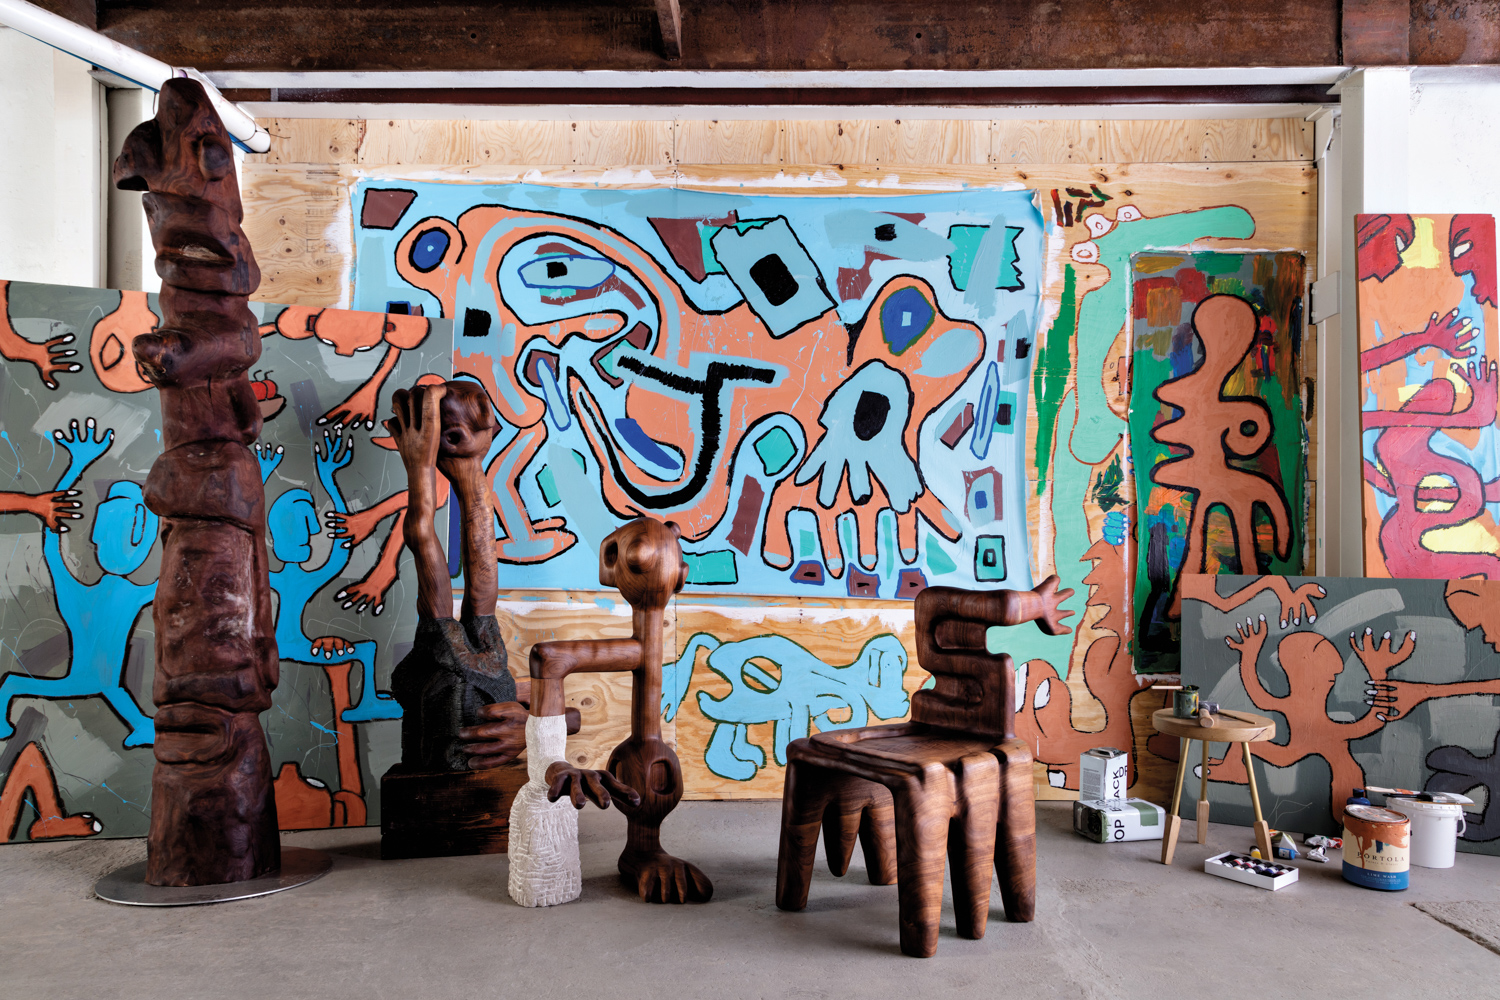 Wood sculptures by Casey McCafferty surrounded by colorful abstract murals on his studio's walls